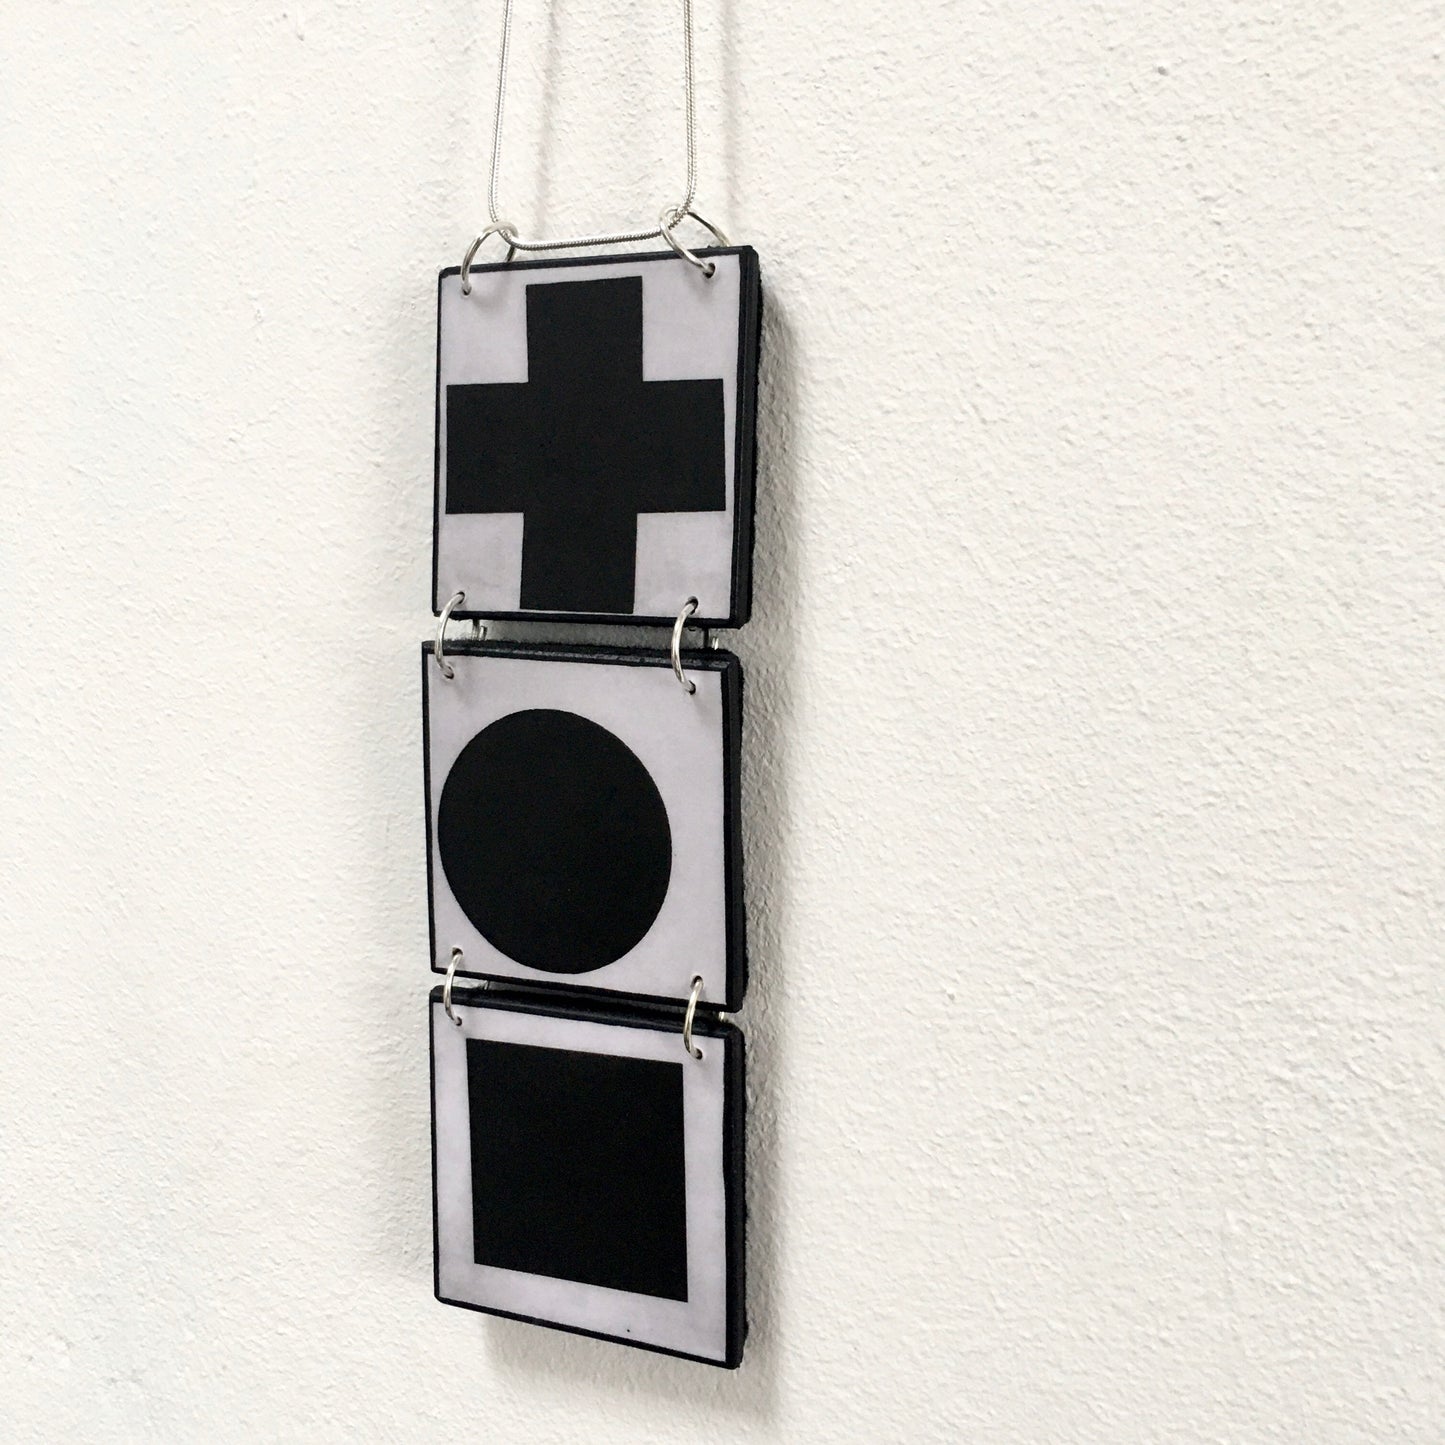 Black Cross, Black Circle, Black Square, Obljewellery is inspired by Kazimir Malevich and his Suprematist paintings for this Necklace pendant.